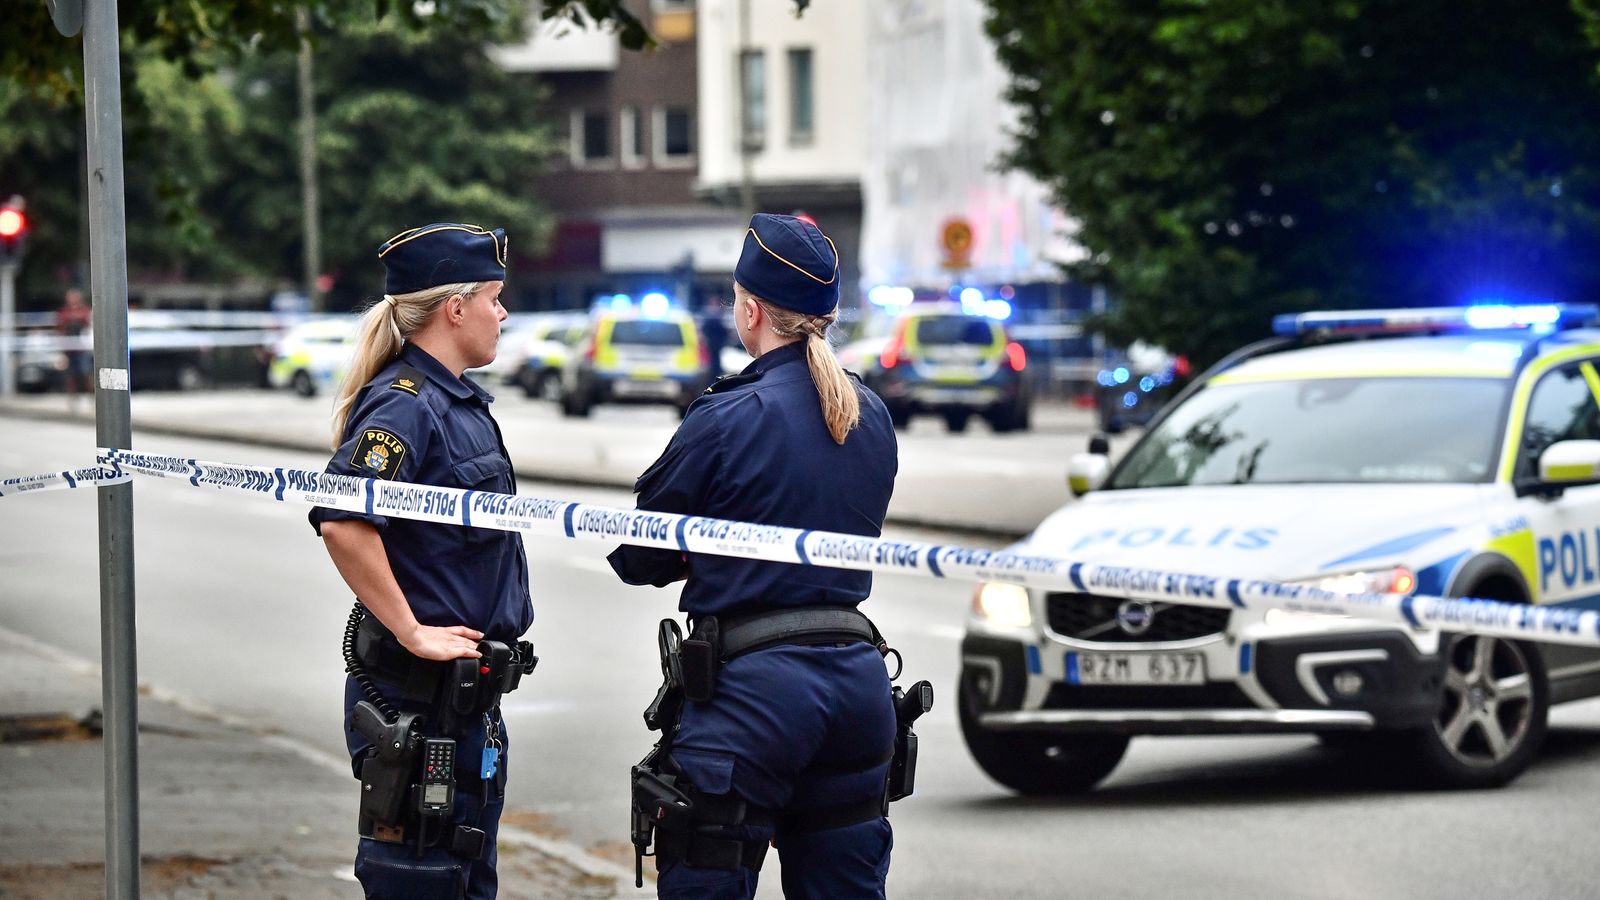 Three dead and three wounded in Sweden shooting 'between criminal